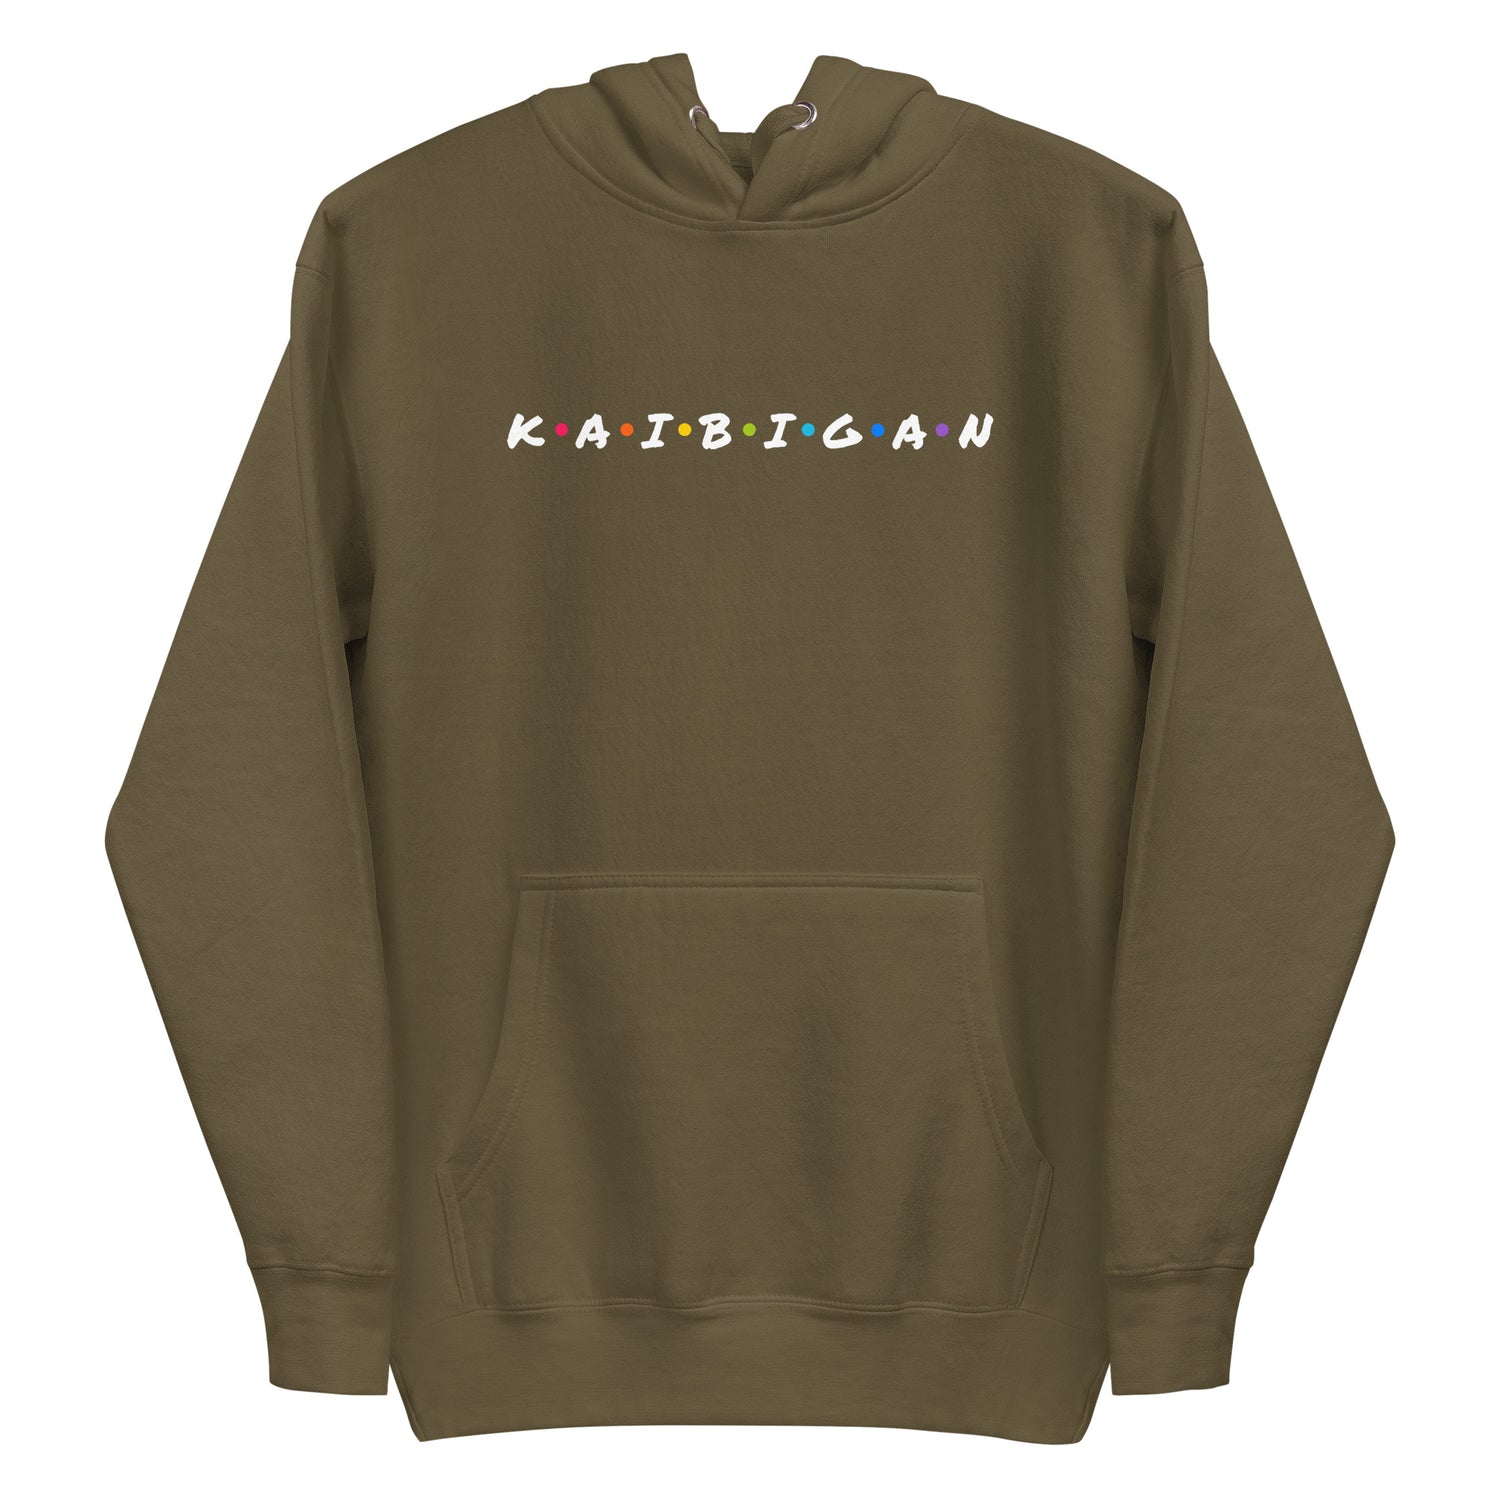 Filipino Hoodie Kaibigan Friends Merch in color variant Military Green